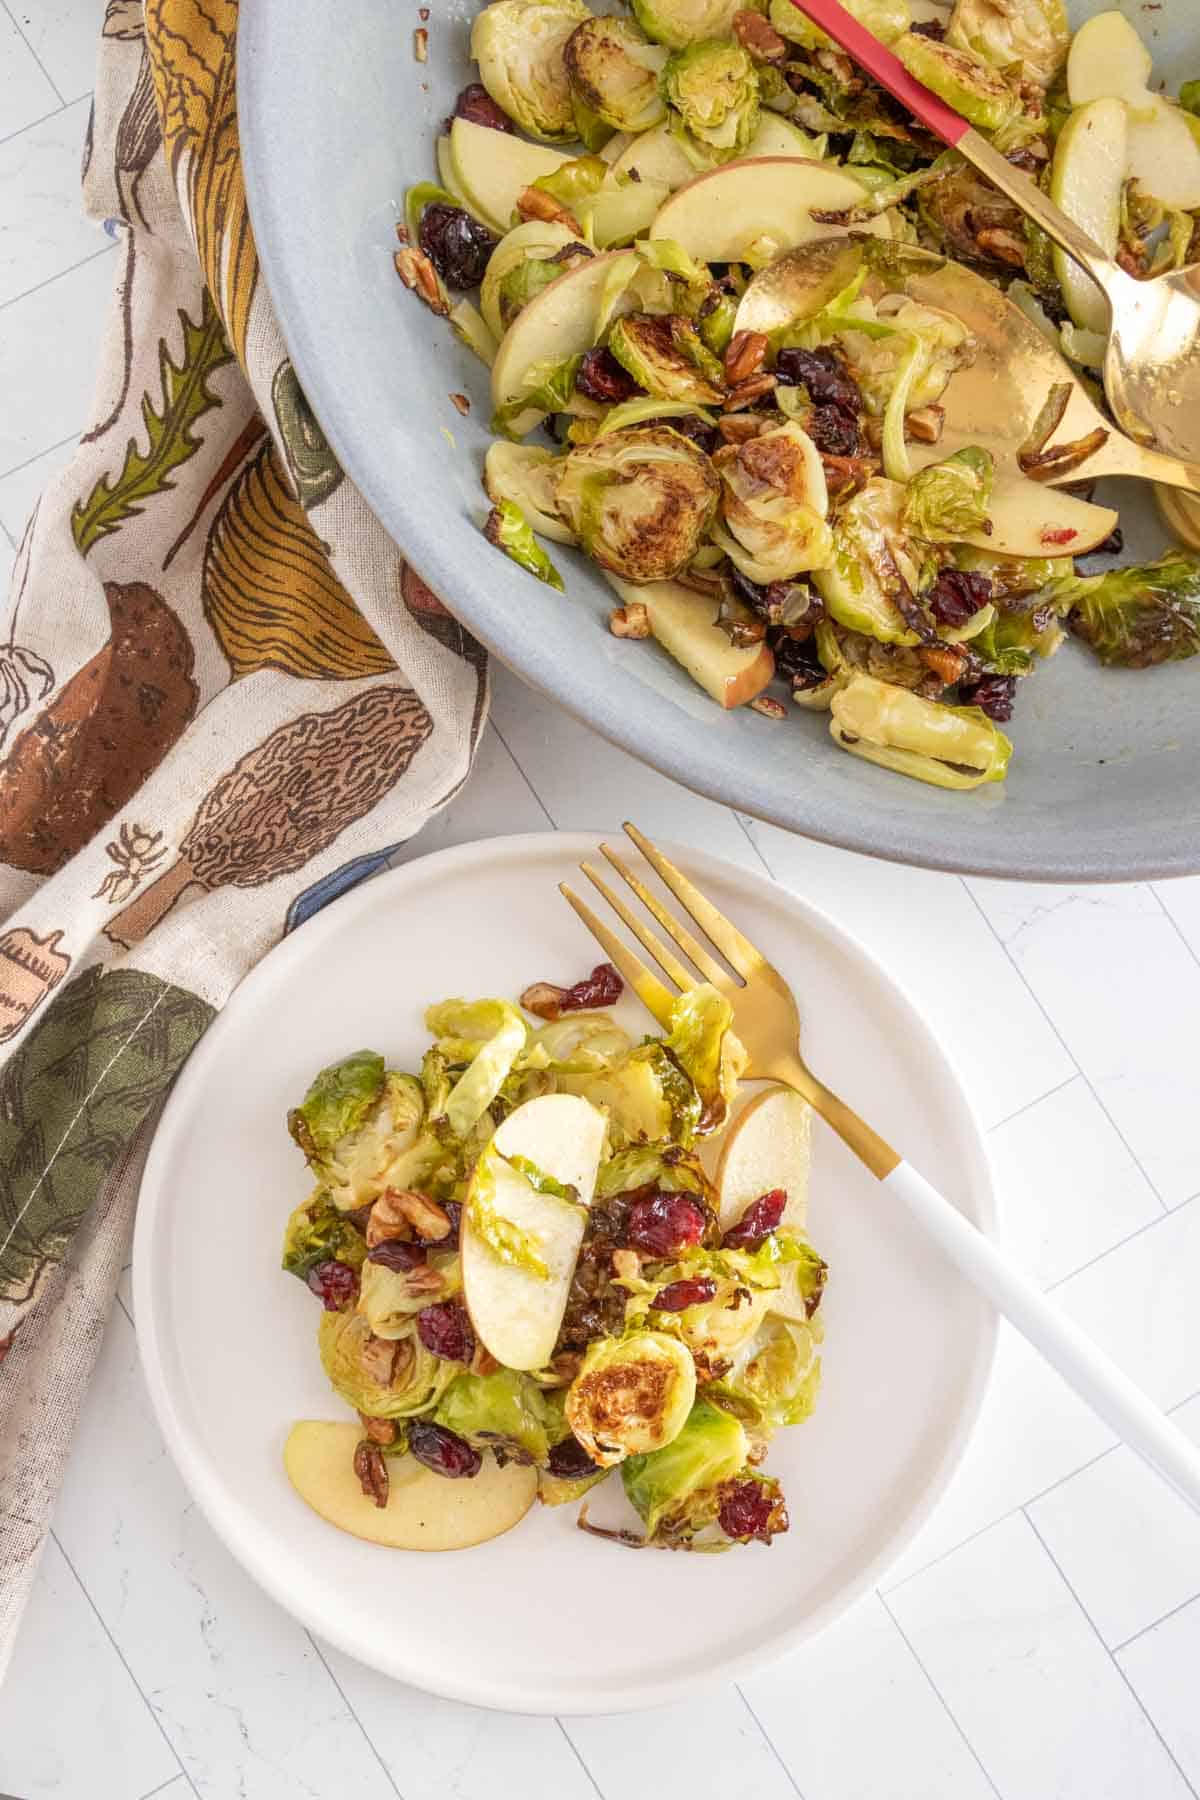 A plate of brussels sprouts with apples and cranberries.